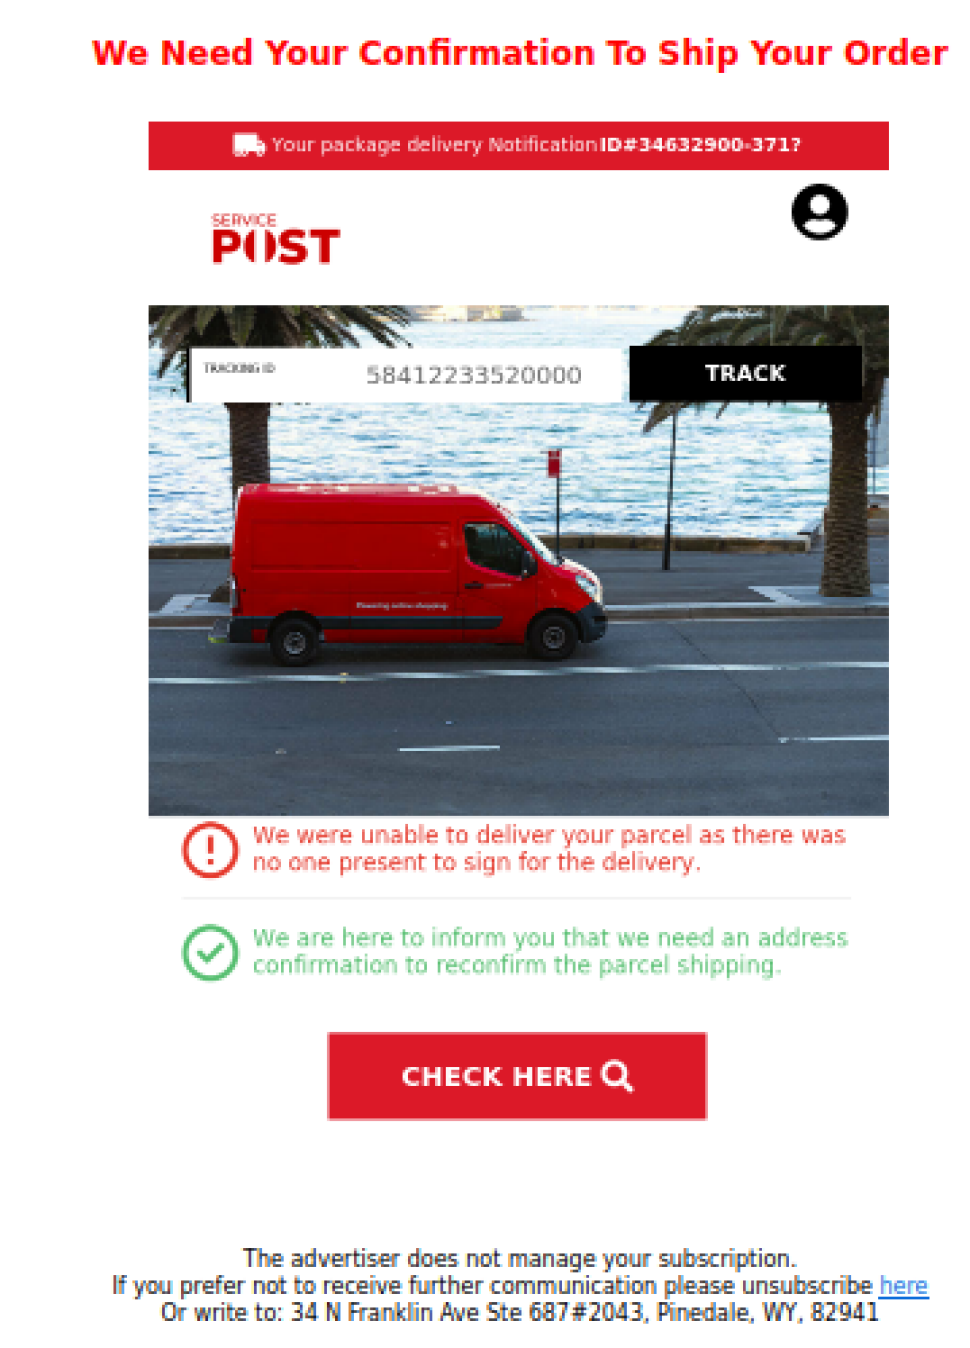 The subject of the Email reads ‘ We need your Confirmation To Ship Your Order’
the message has a “Service Post”  logo which is very similar to Australia Post logo at top and reads as below.

“TRACKING ID 58412233520000” <a lack button with ‘TRACK’ written on it is next to it>
<There is an image of a red delivery vehicle>
We were unable to deliver your parcel as there was no one present to sign for your delivery
We are here to inform you that we need an address confirmation to reconfirm the parcel shipping”
There is a red button to click on with “CHECK HERE” written on it.